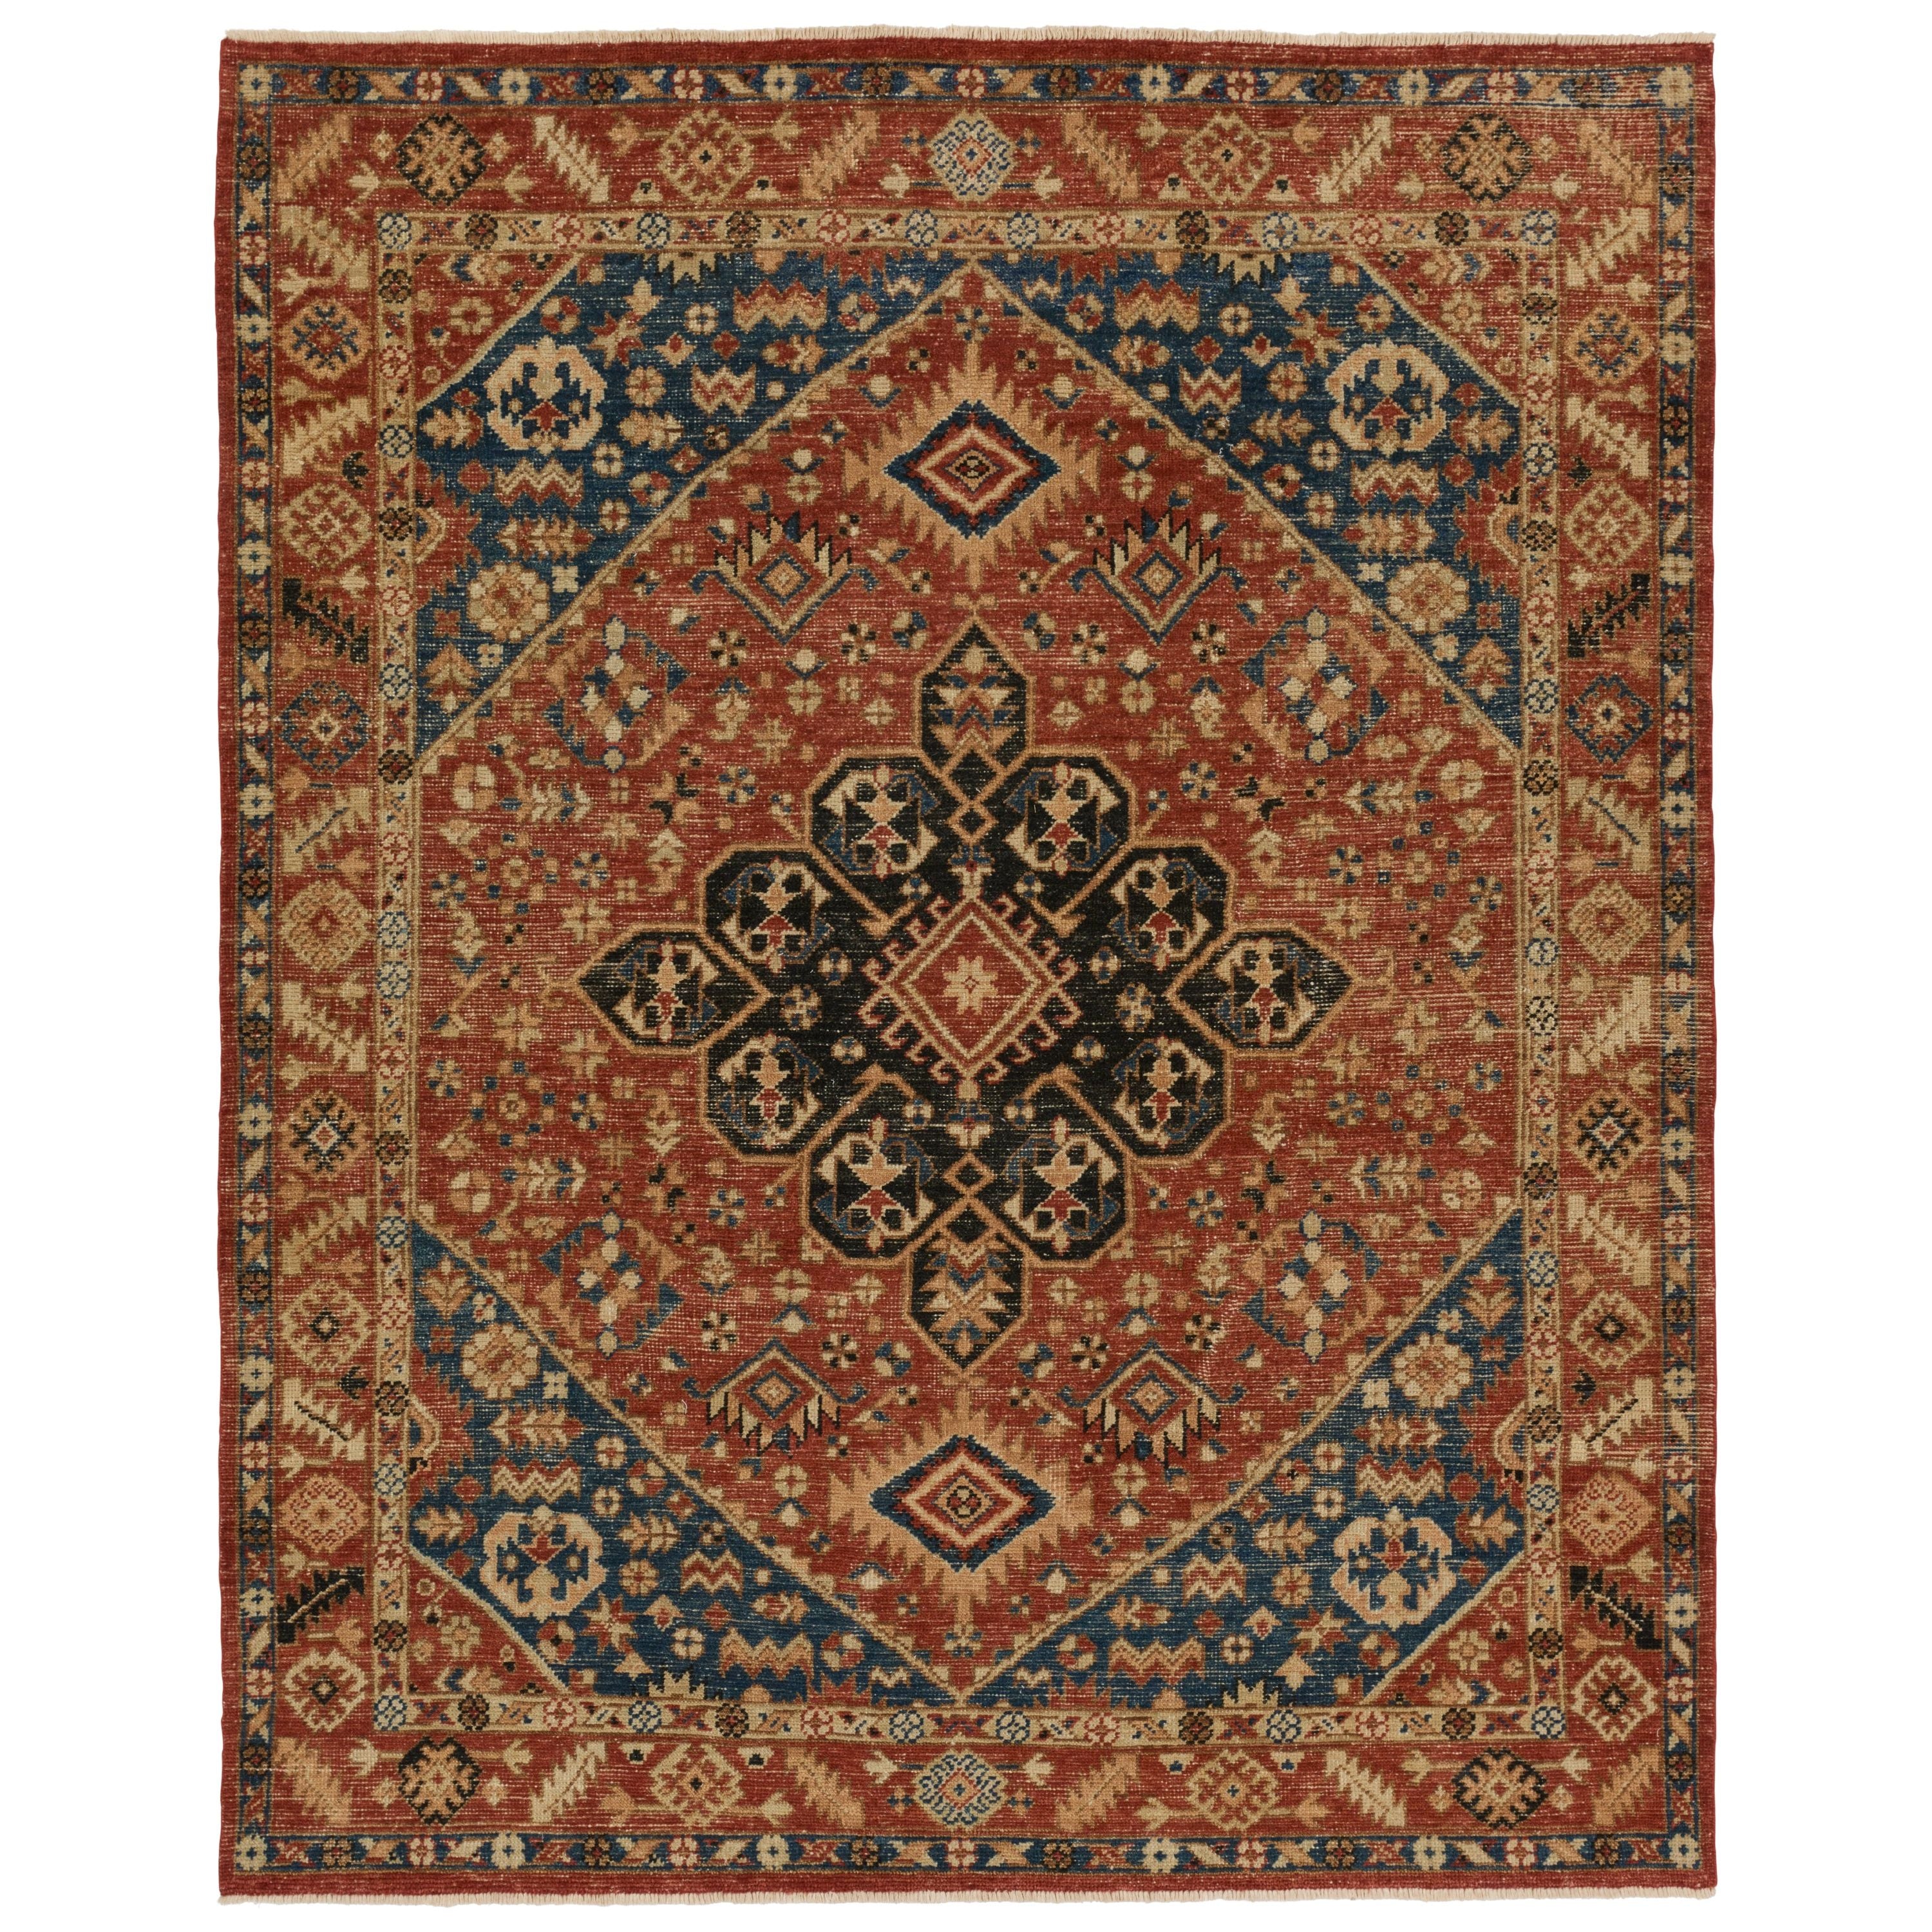 The Rhapsody collection features heirloom-quality designs of stunningly abrashed Old World patterns. The Lucius area rug boasts a beautifully washed center-medallion with a decorative border. The red tones are accented with blue, black, cream, orange, and brown hues for added depth and intrigue. This durable wool handknot anchors living spaces with a fresh take on vintage style. Amethyst Home provides interior design, new construction, custom furniture, and area rugs in the Monterey metro area.